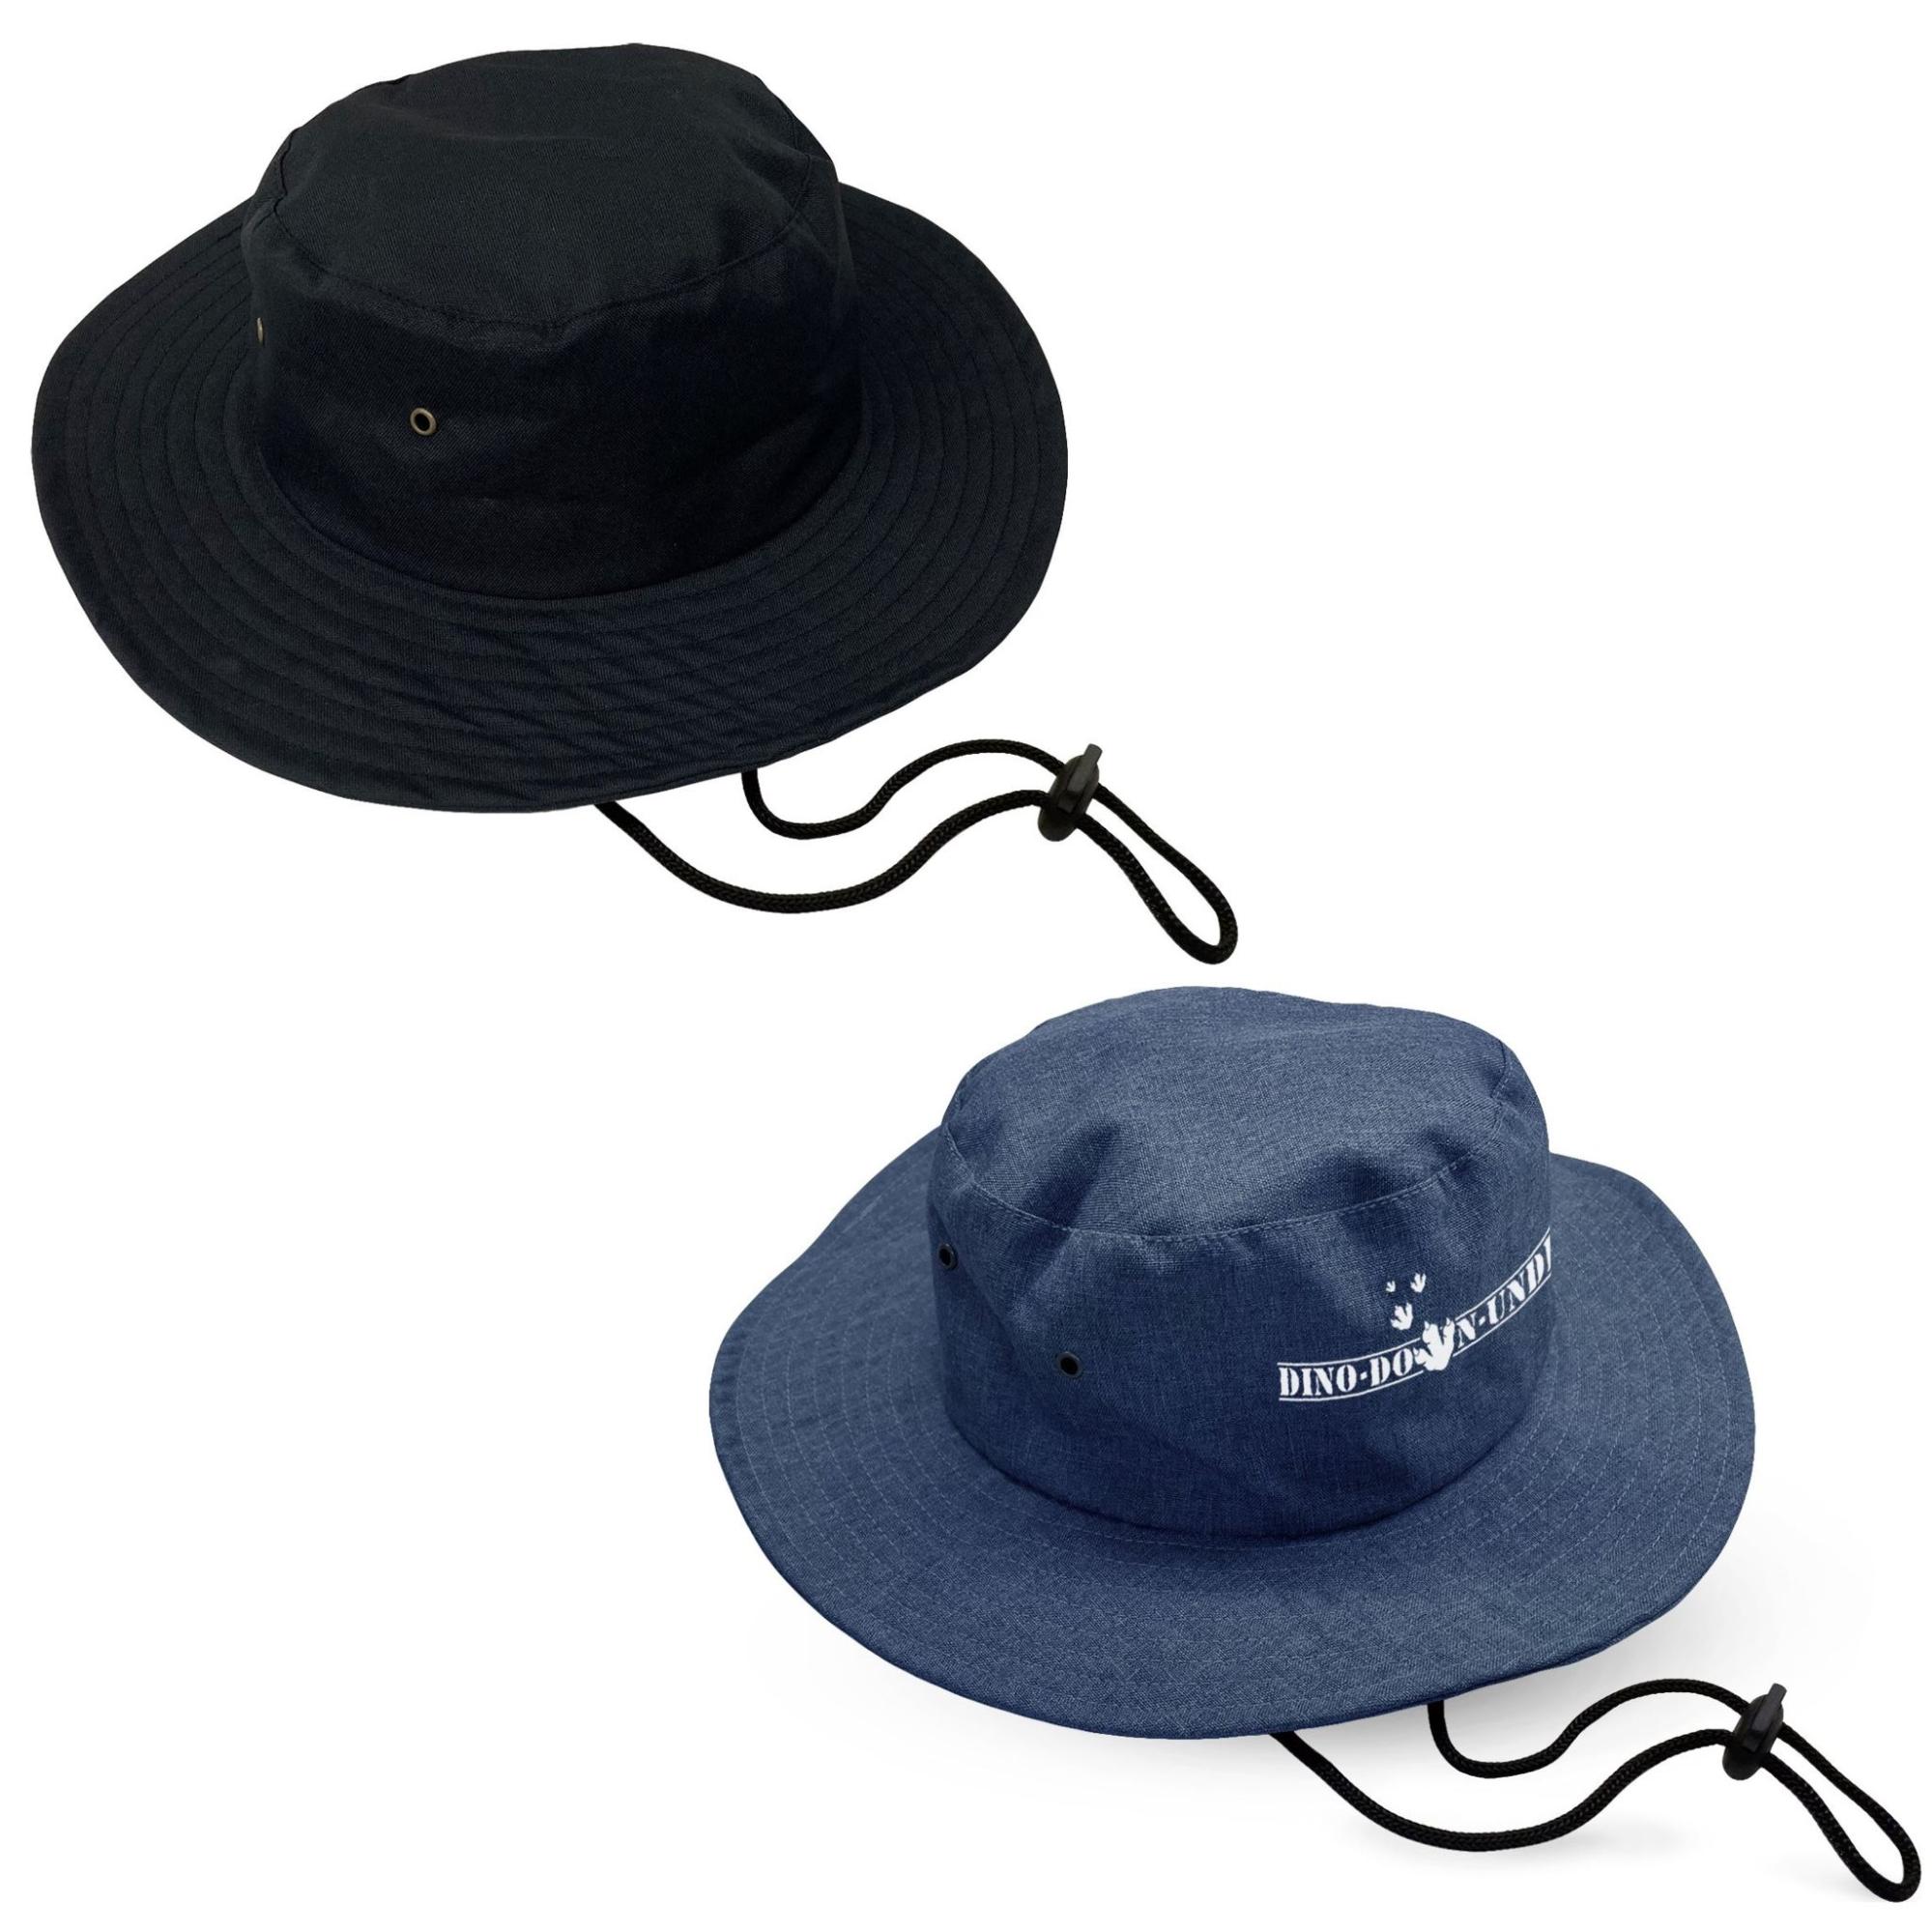 black and blue-colored sun hats with cords 